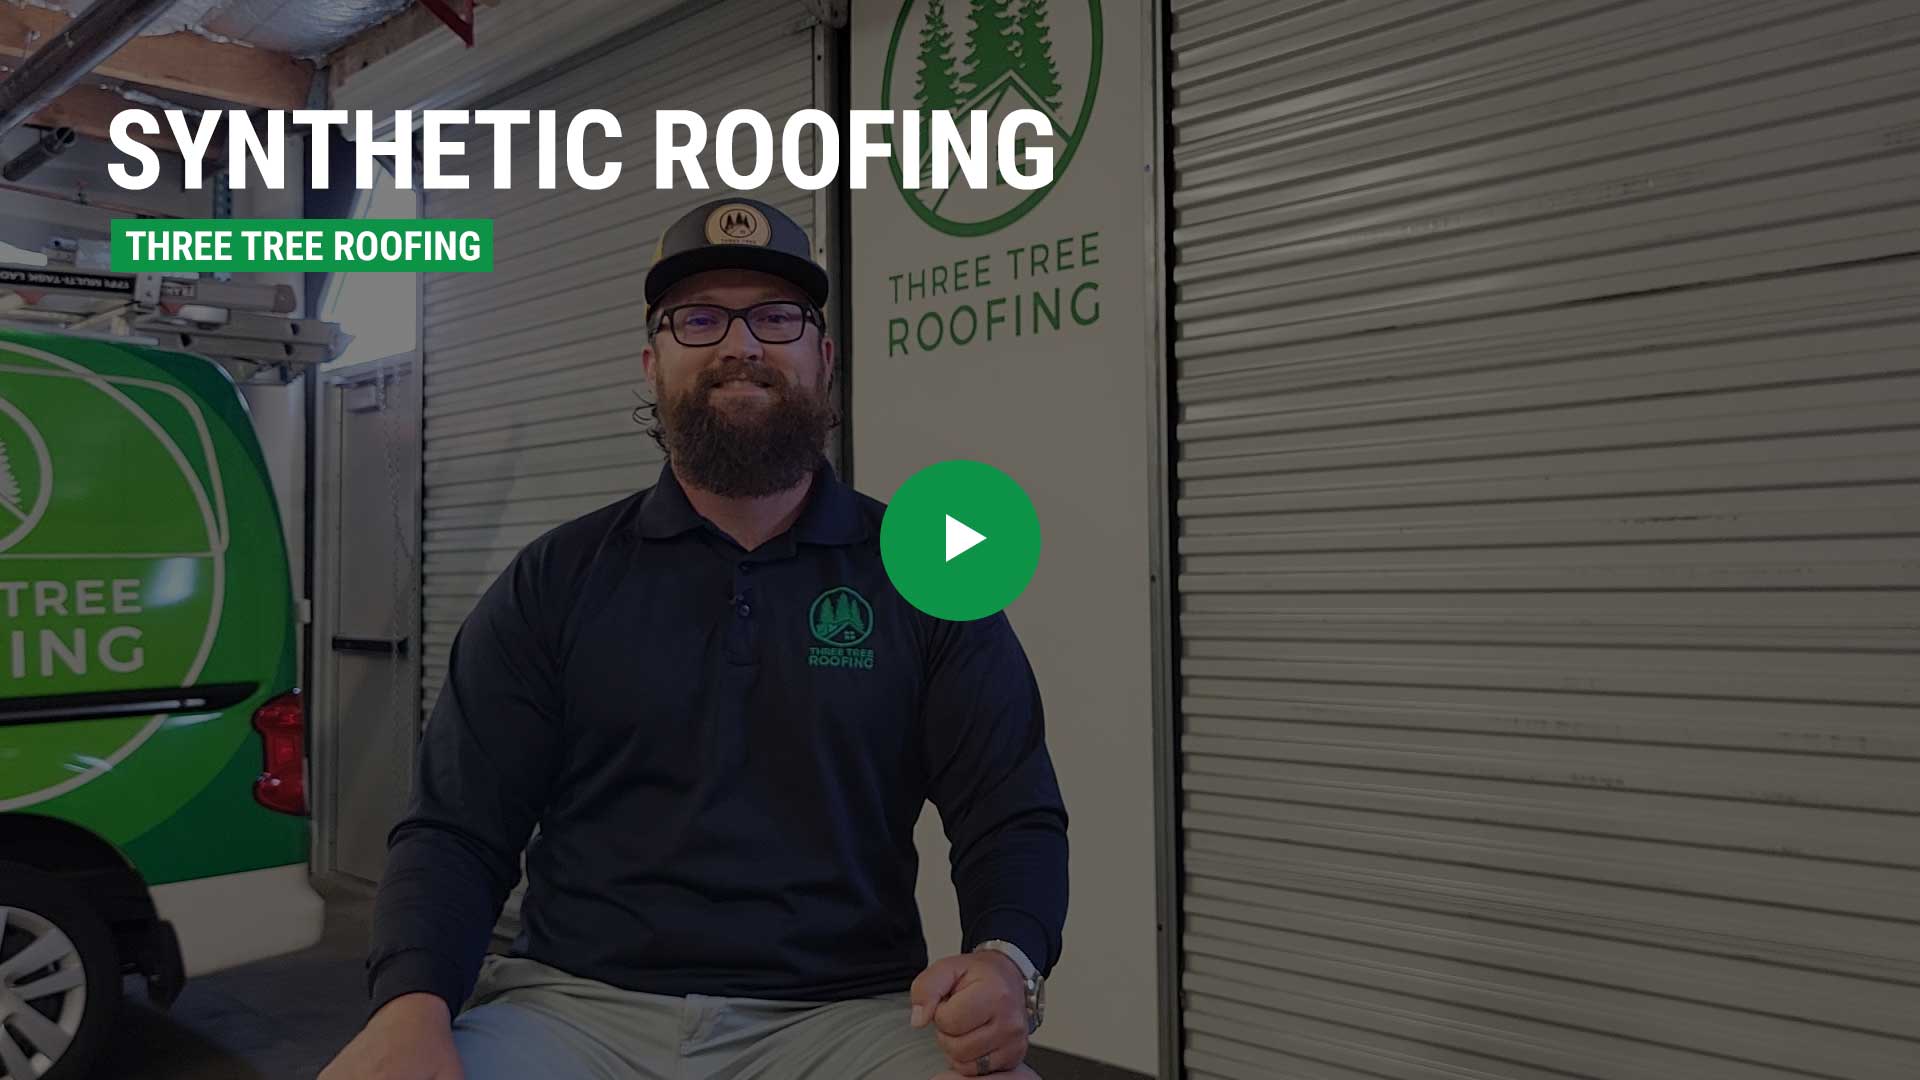 Synthetic Cedar Shake Roofing - Roofing Video